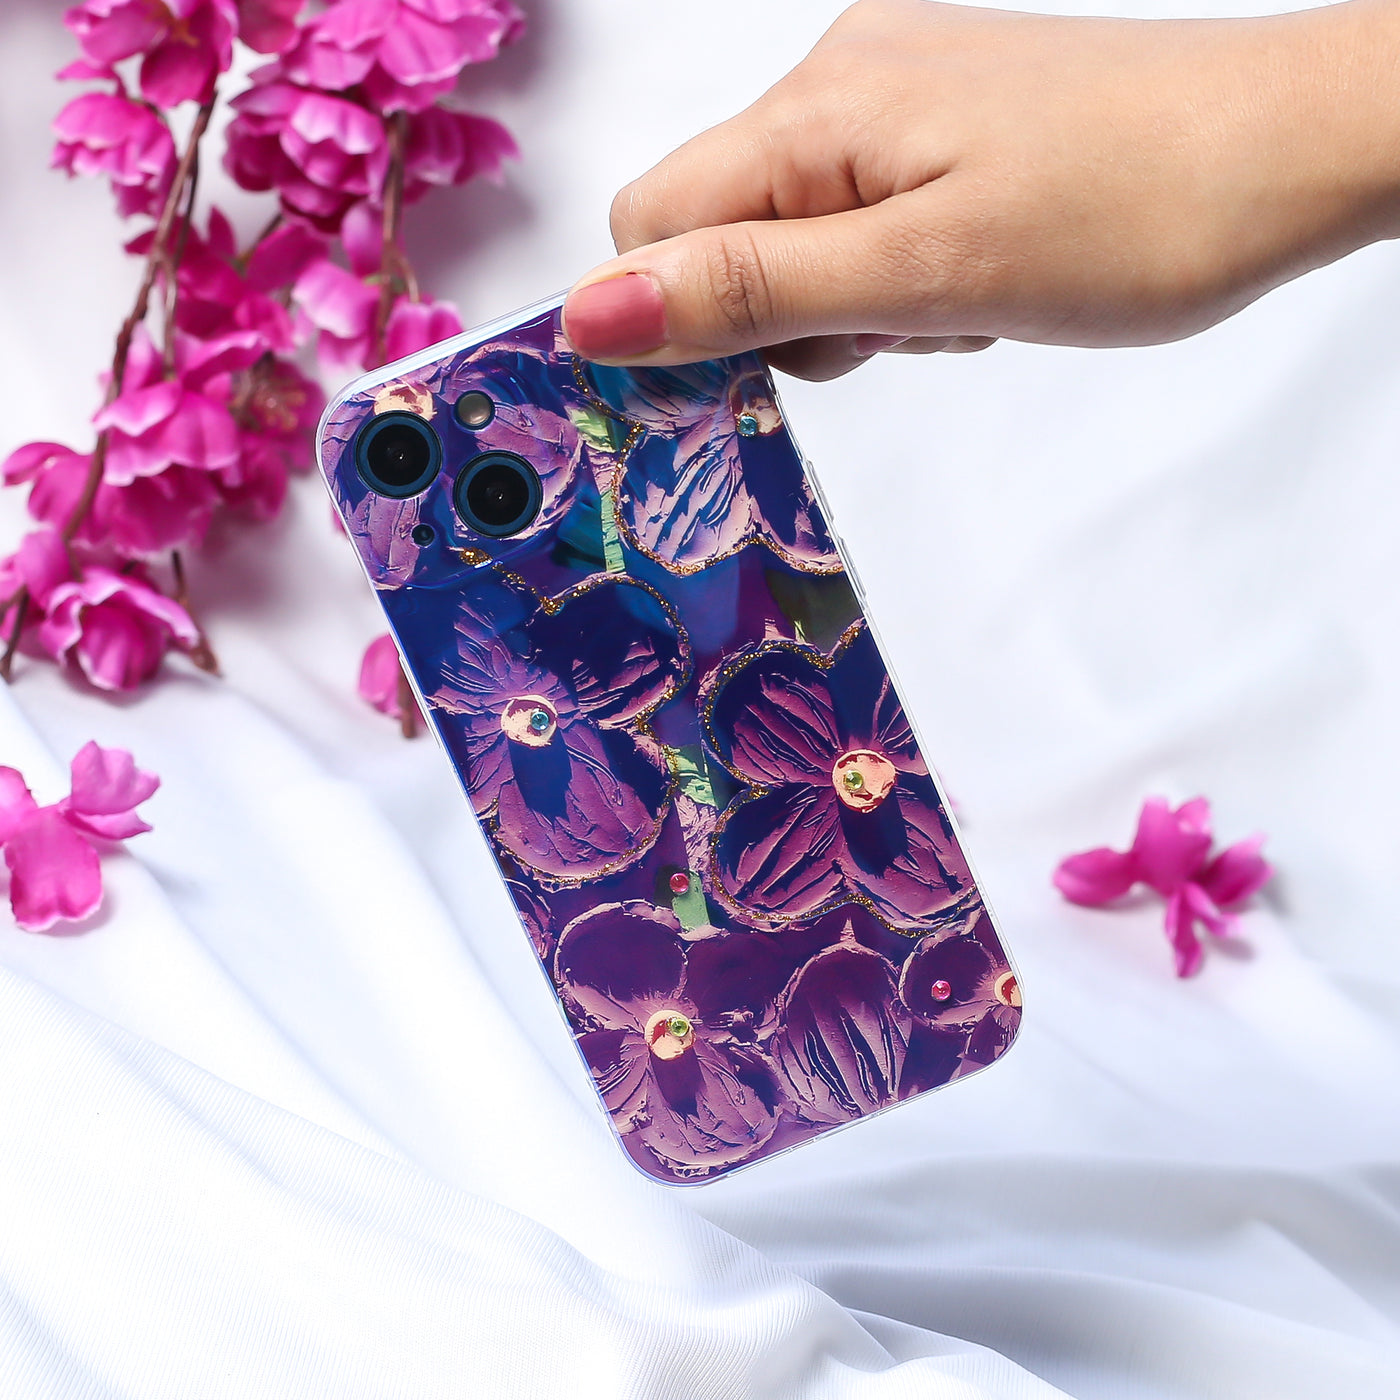 zopoxo/202310211122213645_Artful-Edition-Oil-Painted-Blossom-Phone-Case----Web8.jpg